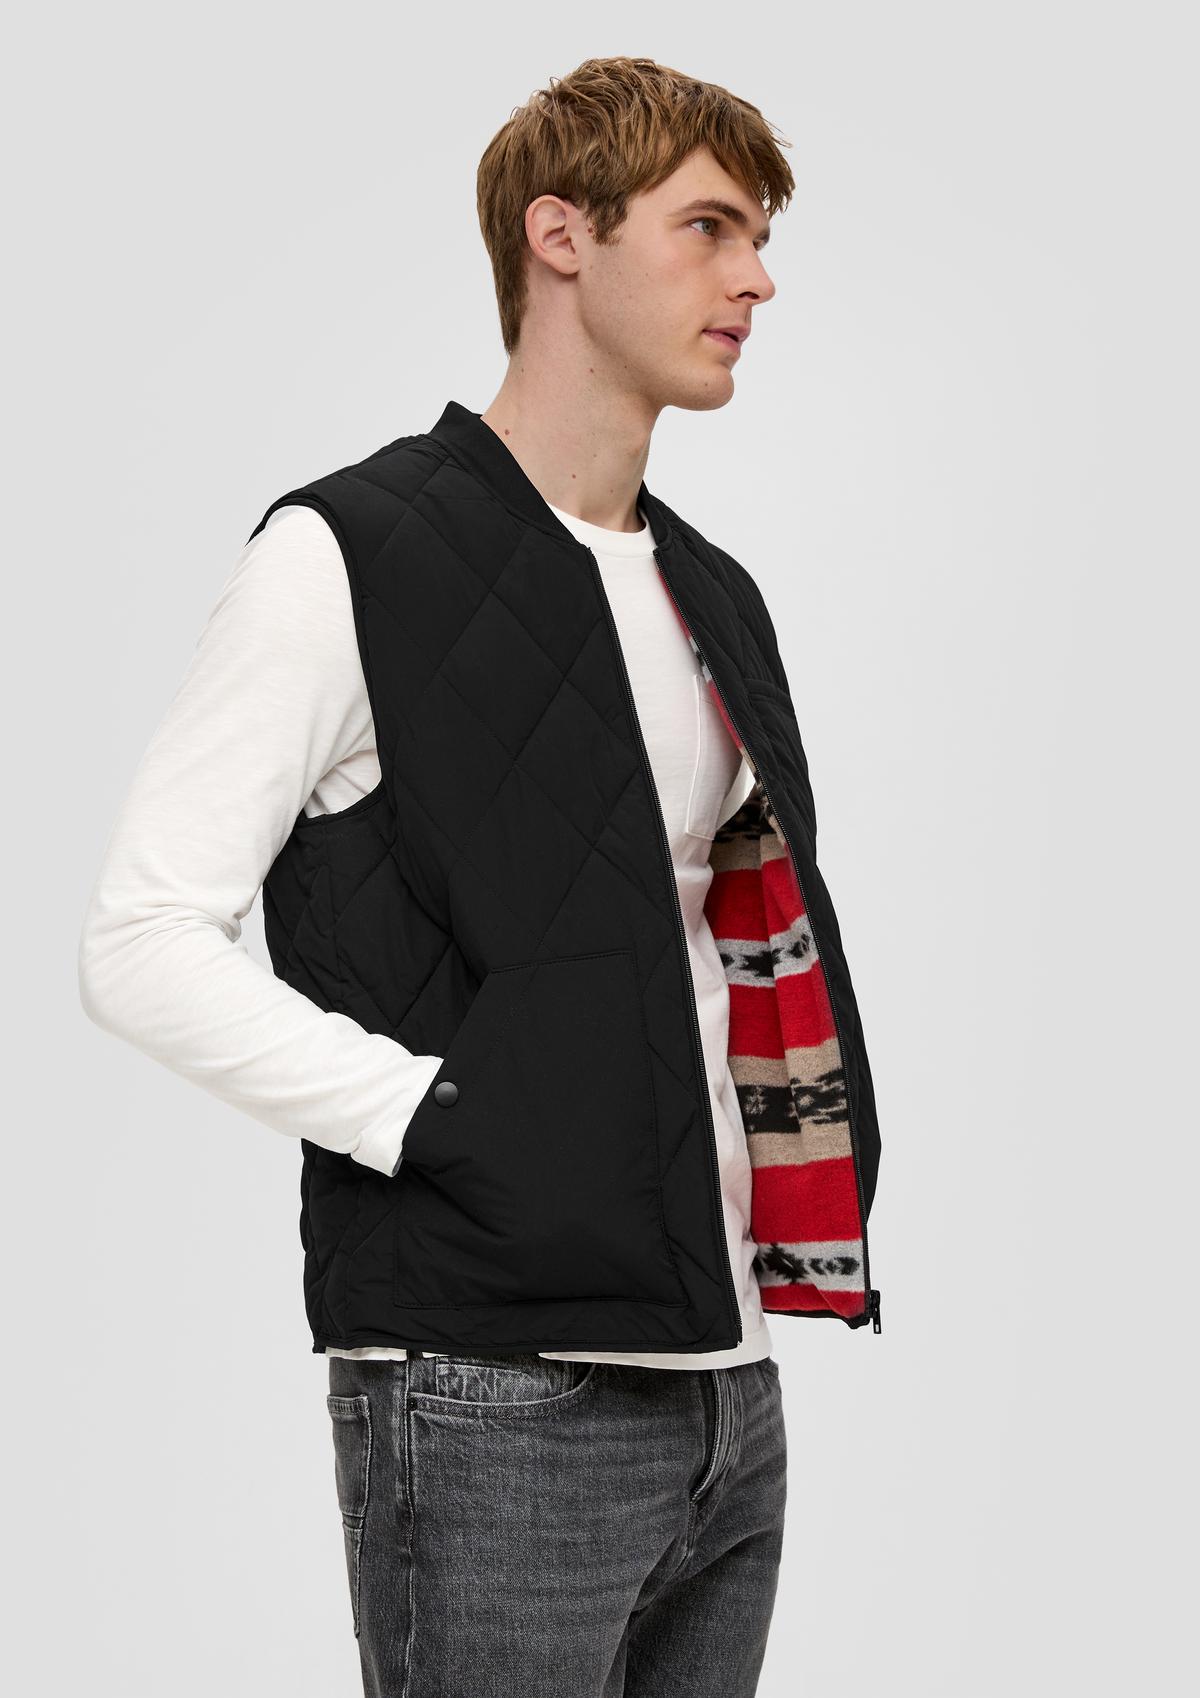 s.Oliver Lightweight body warmer with quilting